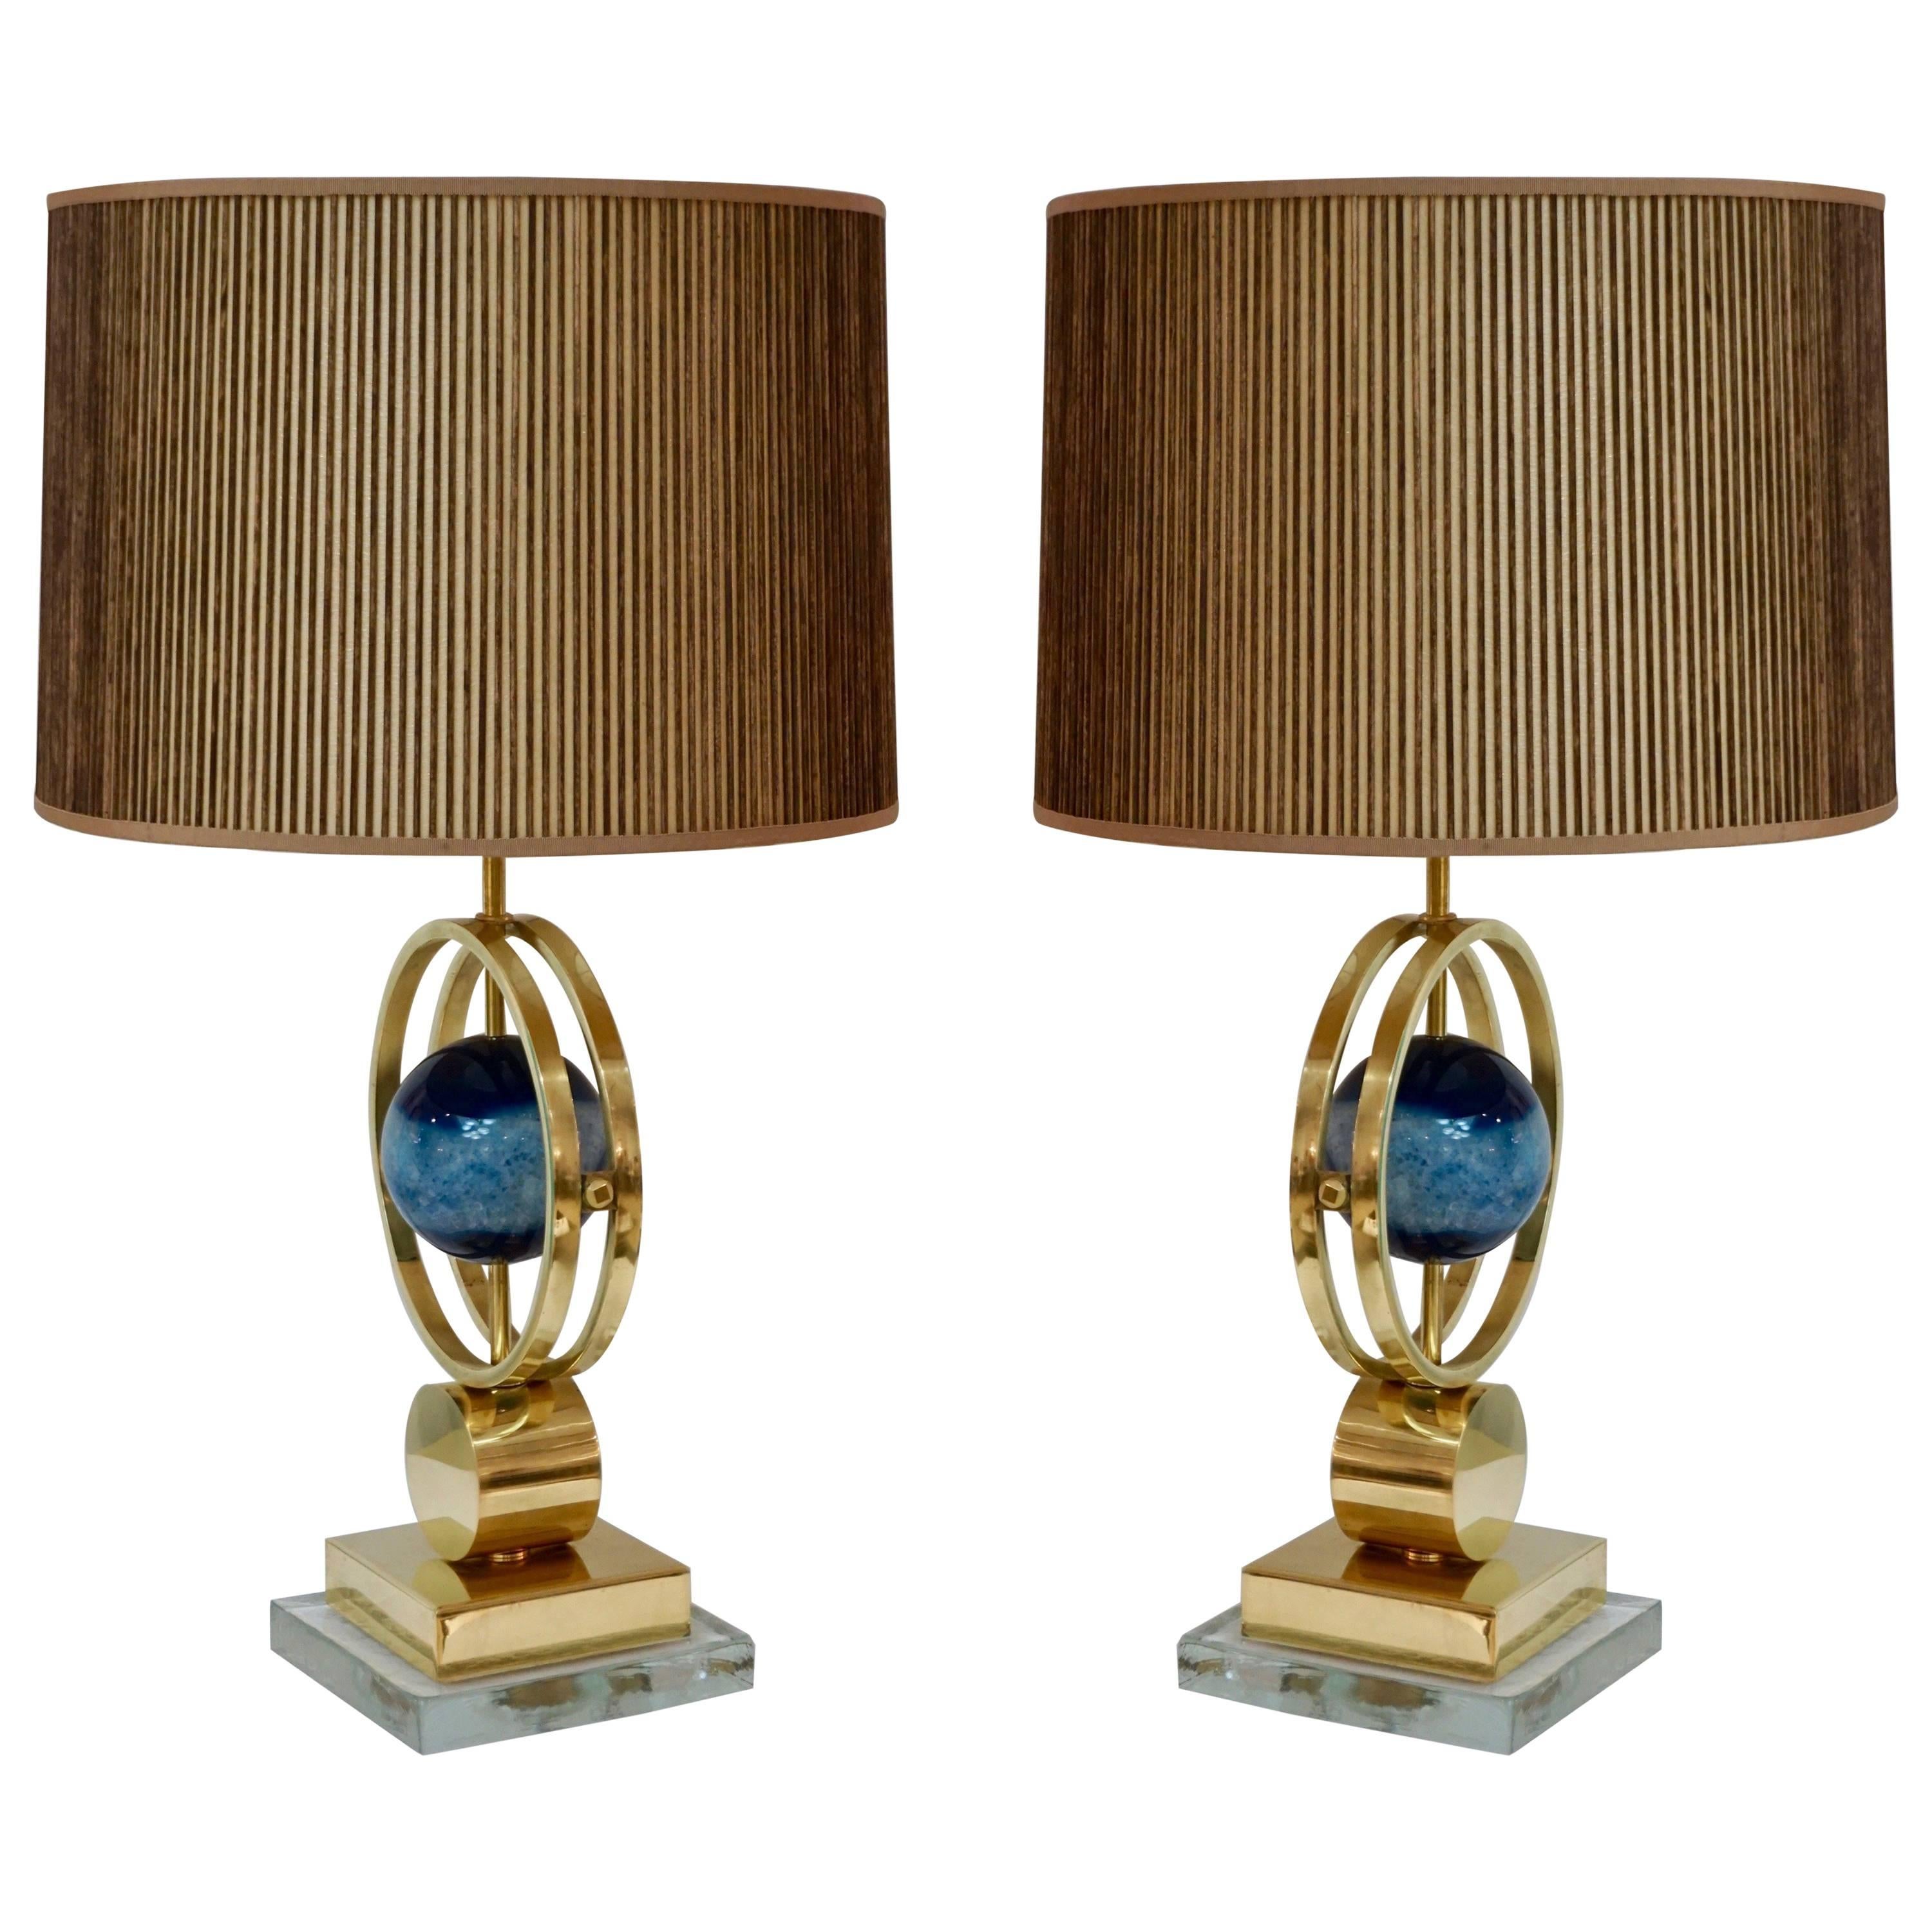 Italian Modern Pair of Brass Lamps with Whole Round Agate Stones in Blue Tones